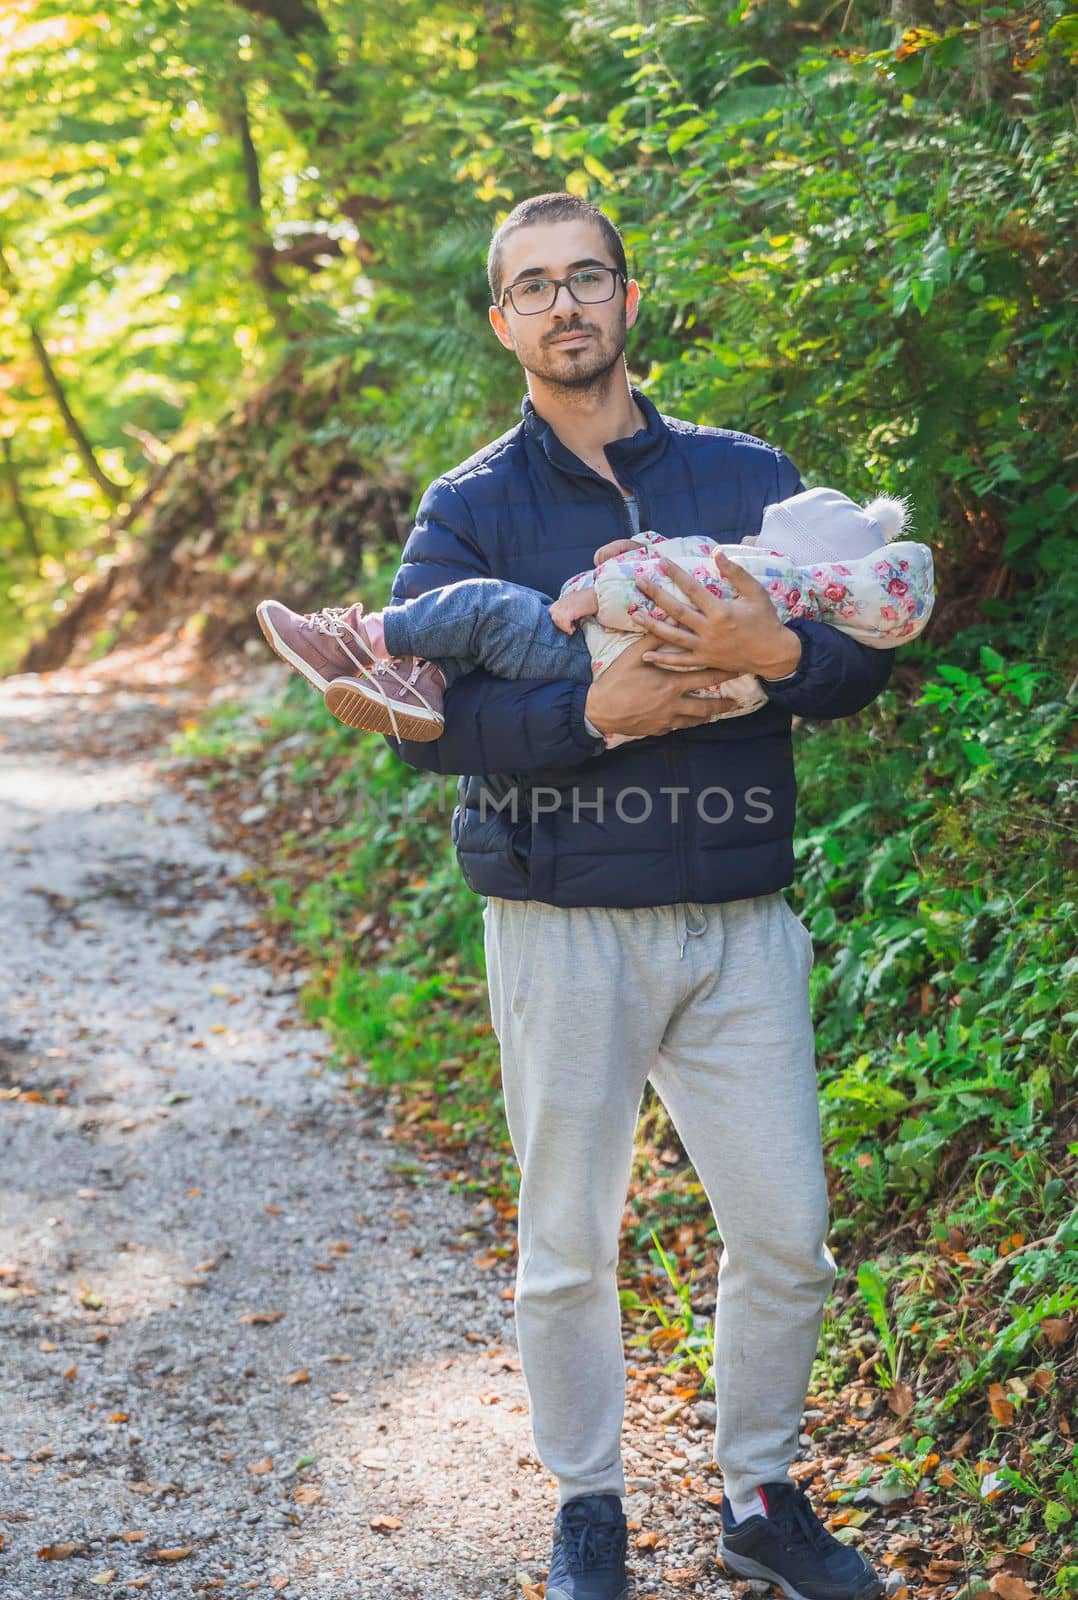 Father holding a sleeping baby in the park.